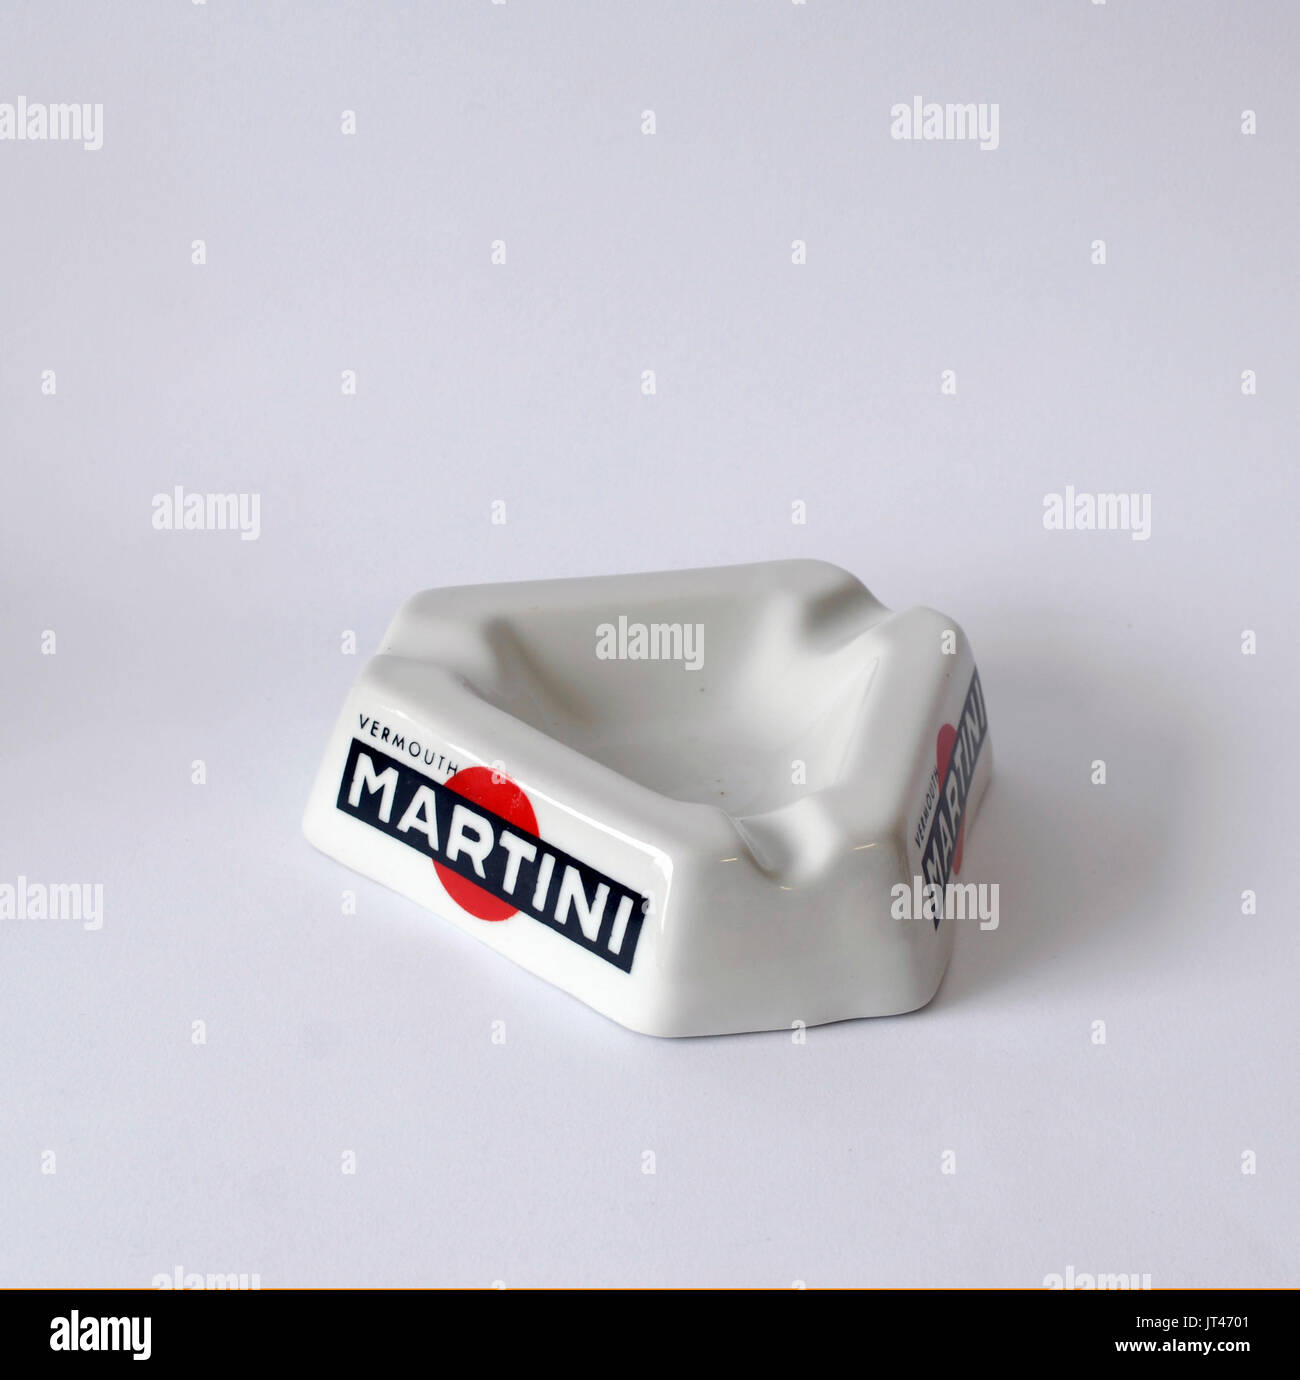 Vintage ashtray made by plastic, publicity logo of Martini Vermouth, for cigarette cigarettes smoker smokers Stock Photo